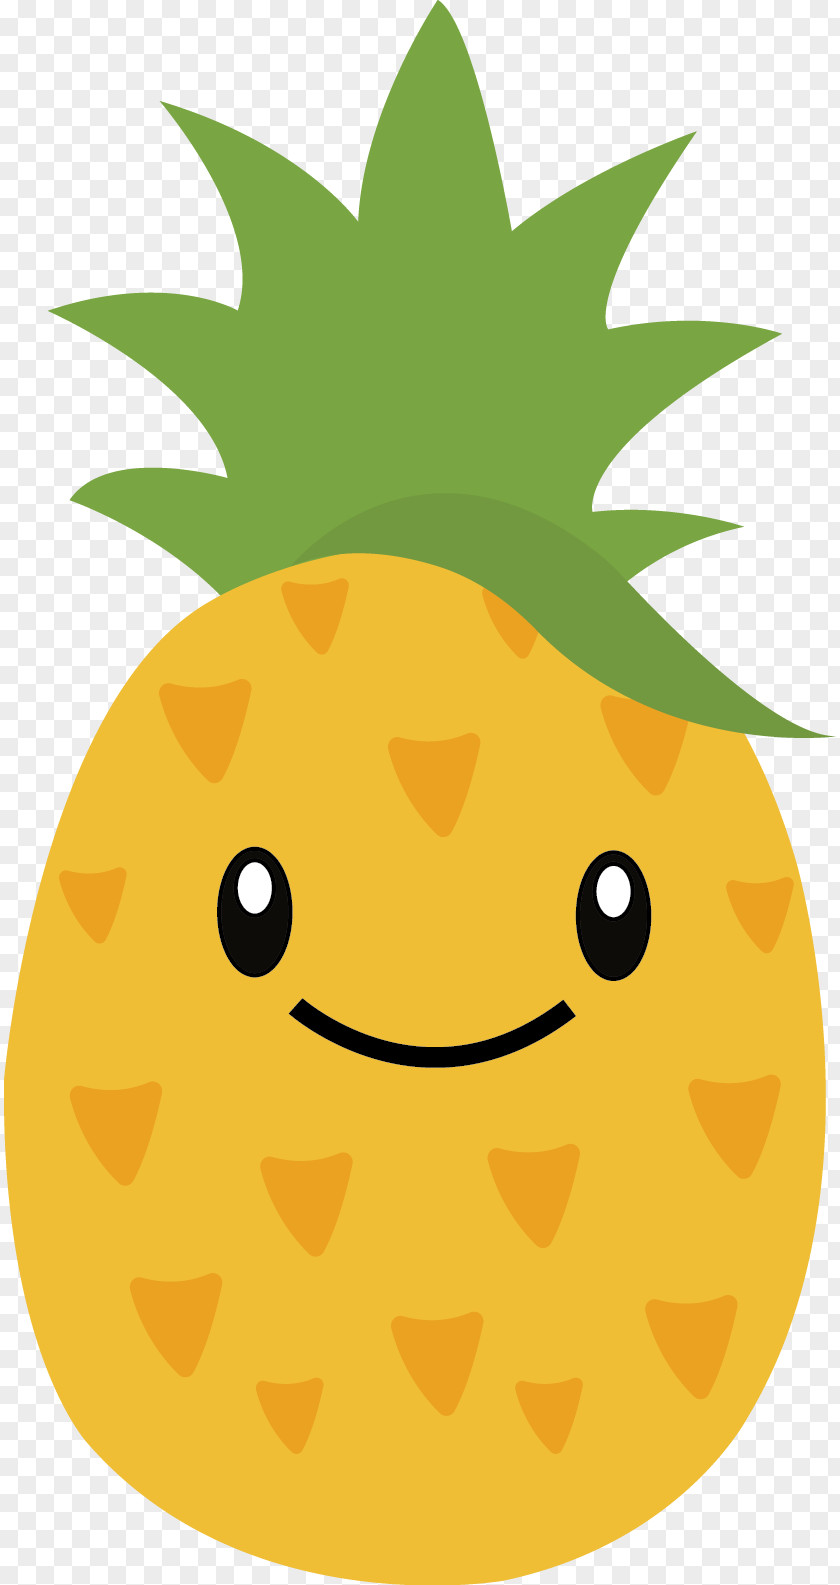 Pineapple Cocktail Smoothie Hawaiian Pizza PNG